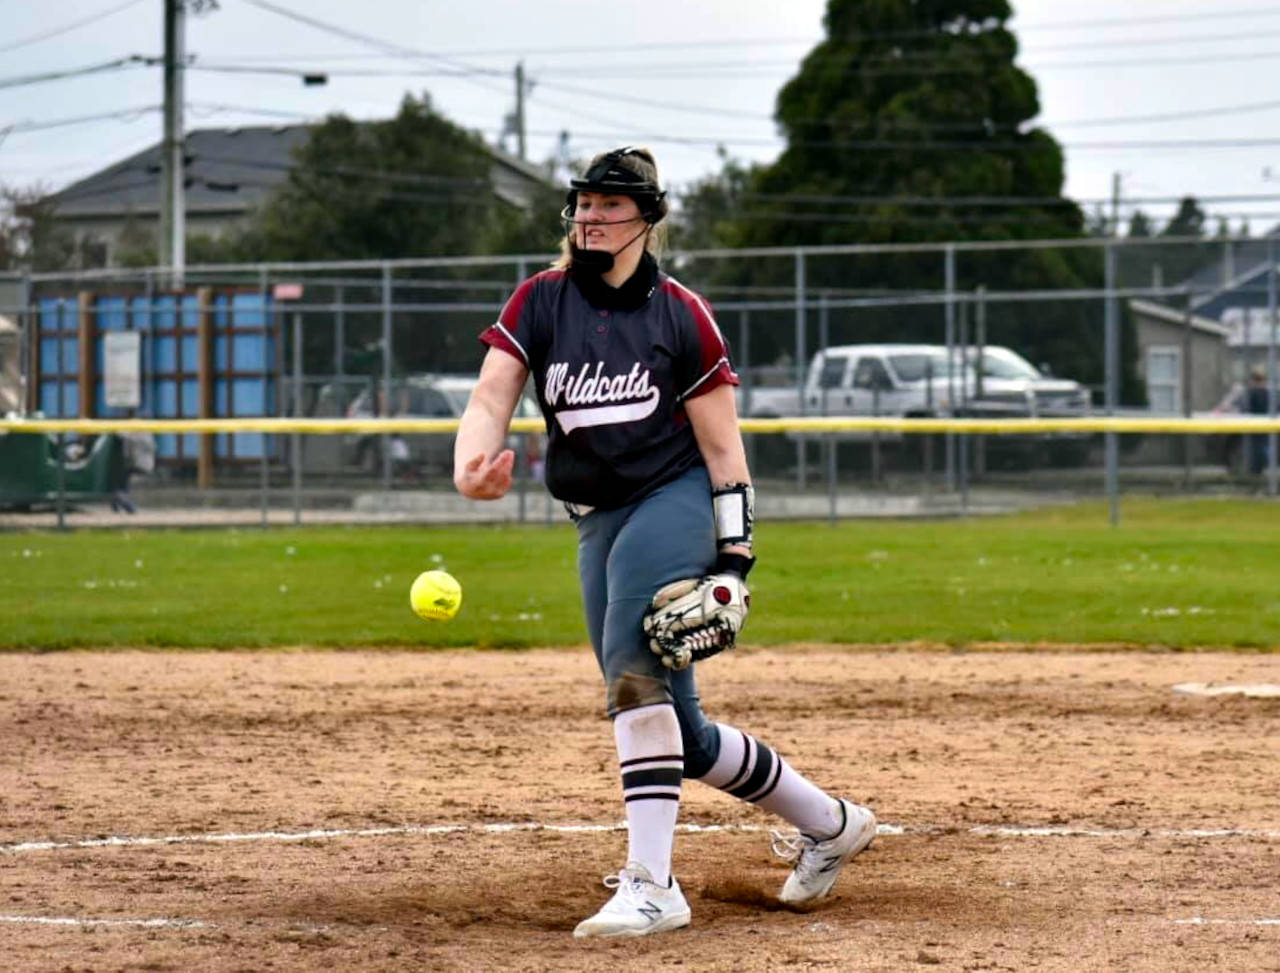 PHOTO BY JENNIFER RAFFELSON Ocosta pitcher Annika Hollingsworth, seen here in a file photo, earned a complete-game victory over Forks in the first game of a doubleheader on Thursday.